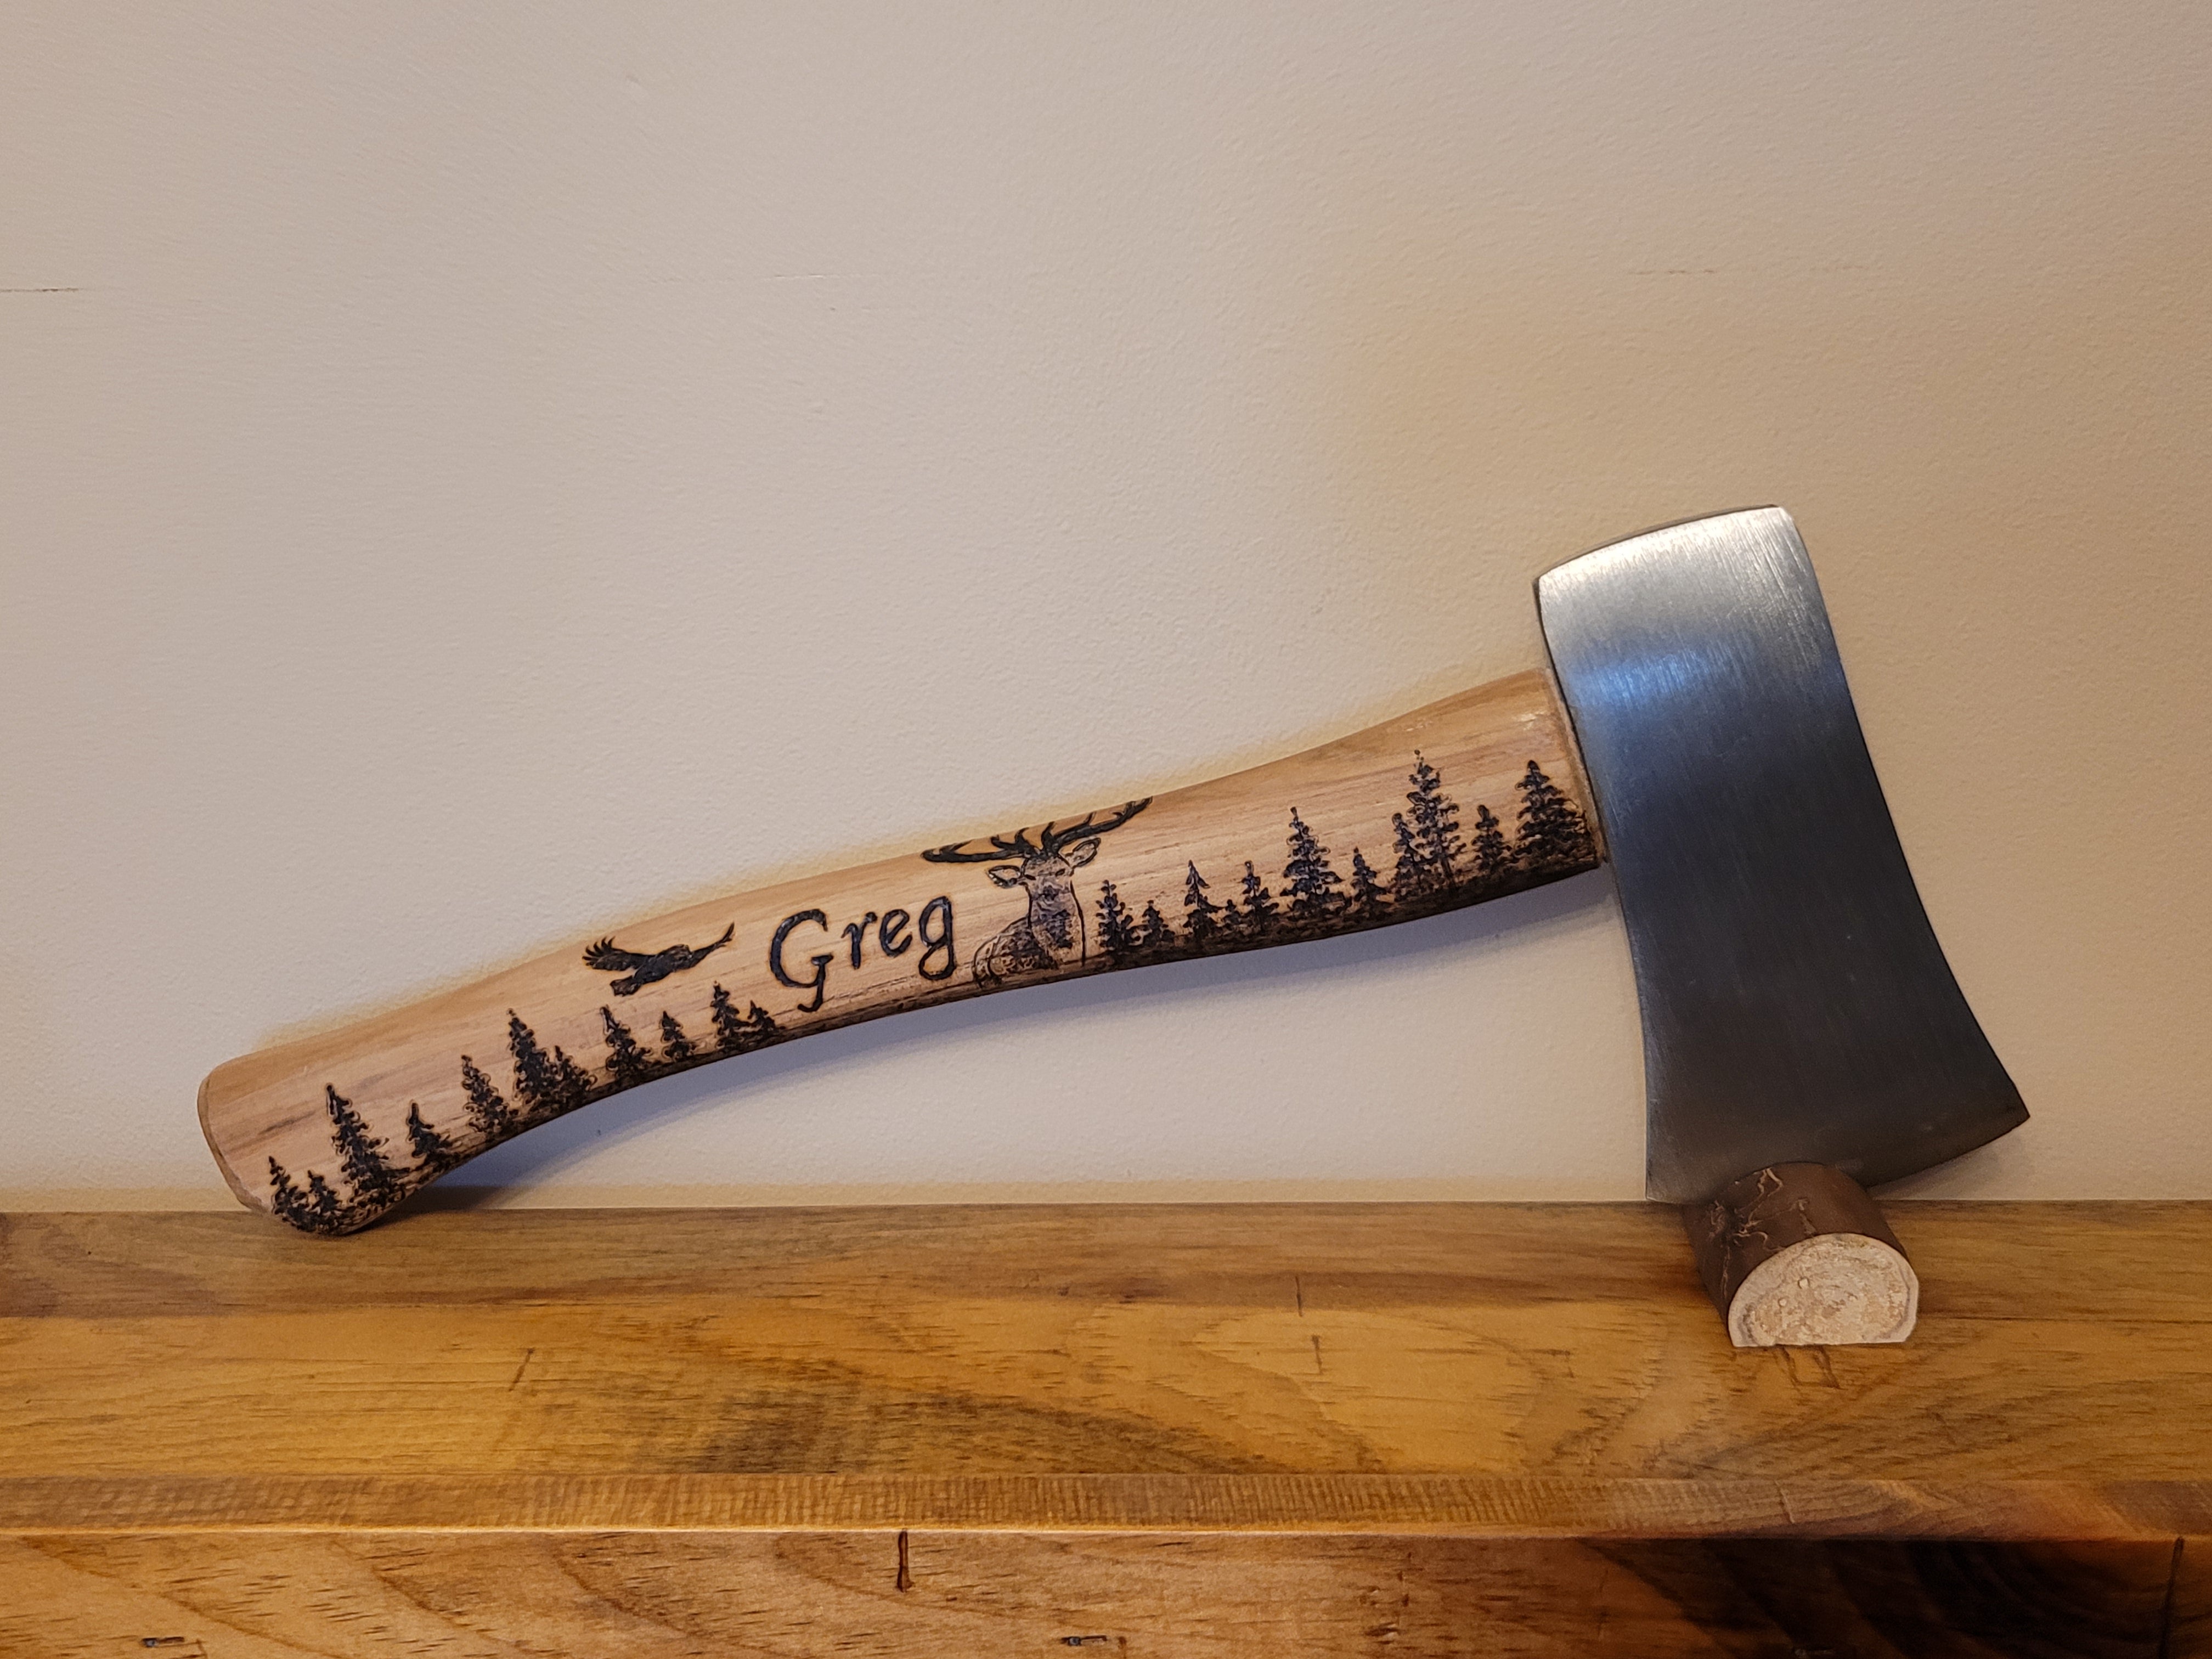 Tune up an all-purpose hatchet into a carving axe - FineWoodworking